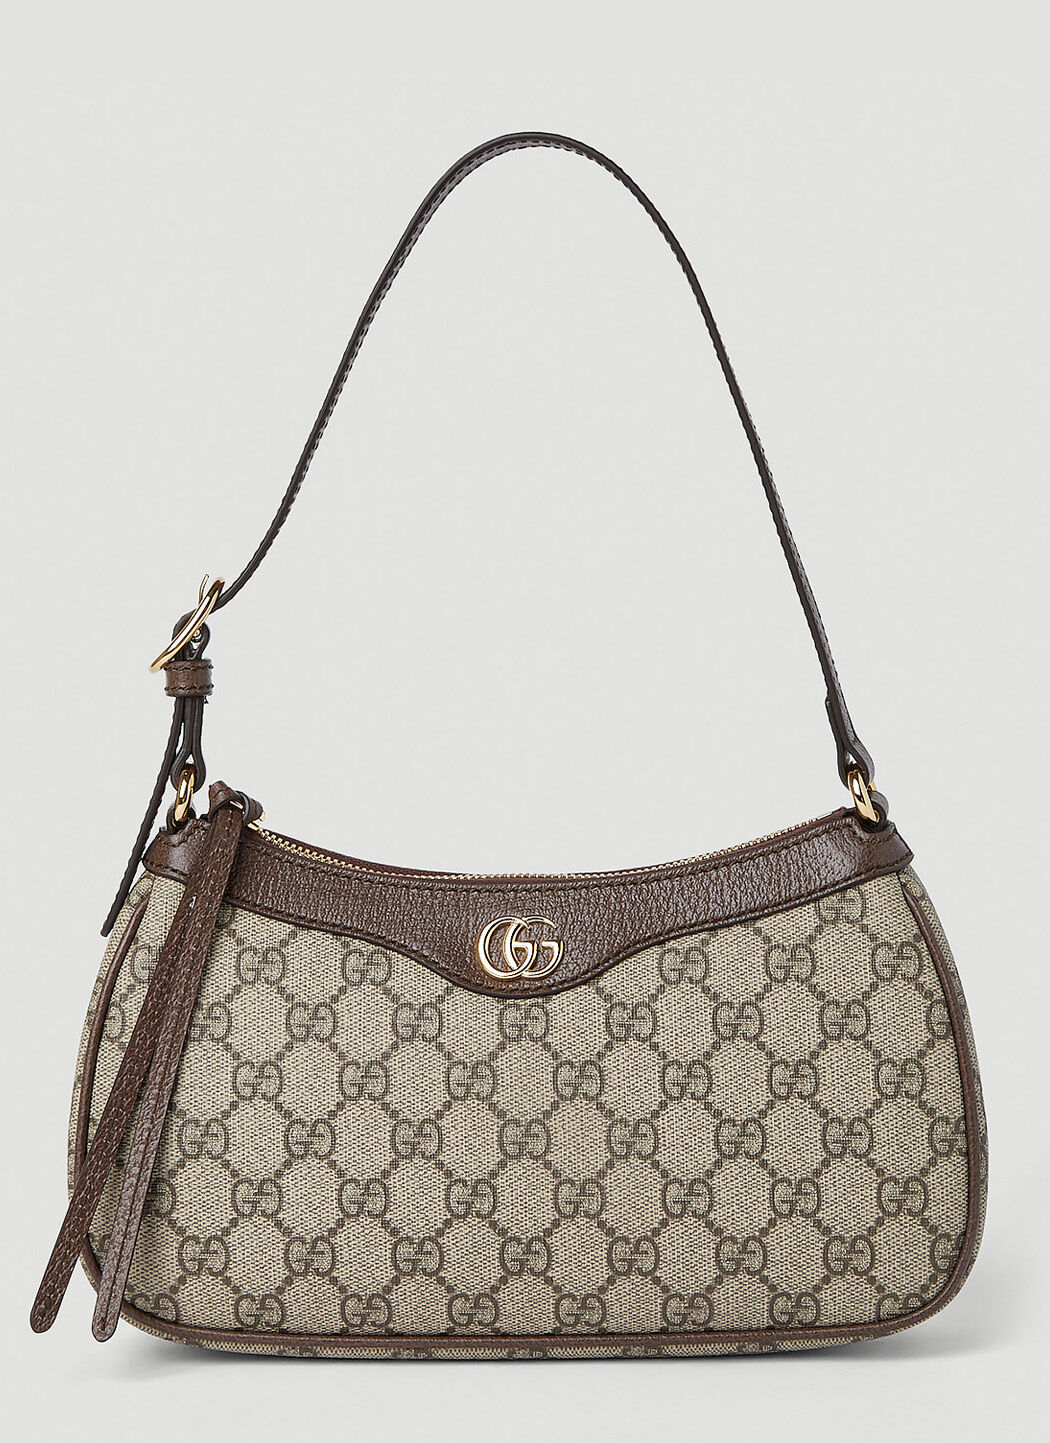 Gucci Ophidia GG Small Shoulder Bag Brown guc0251246